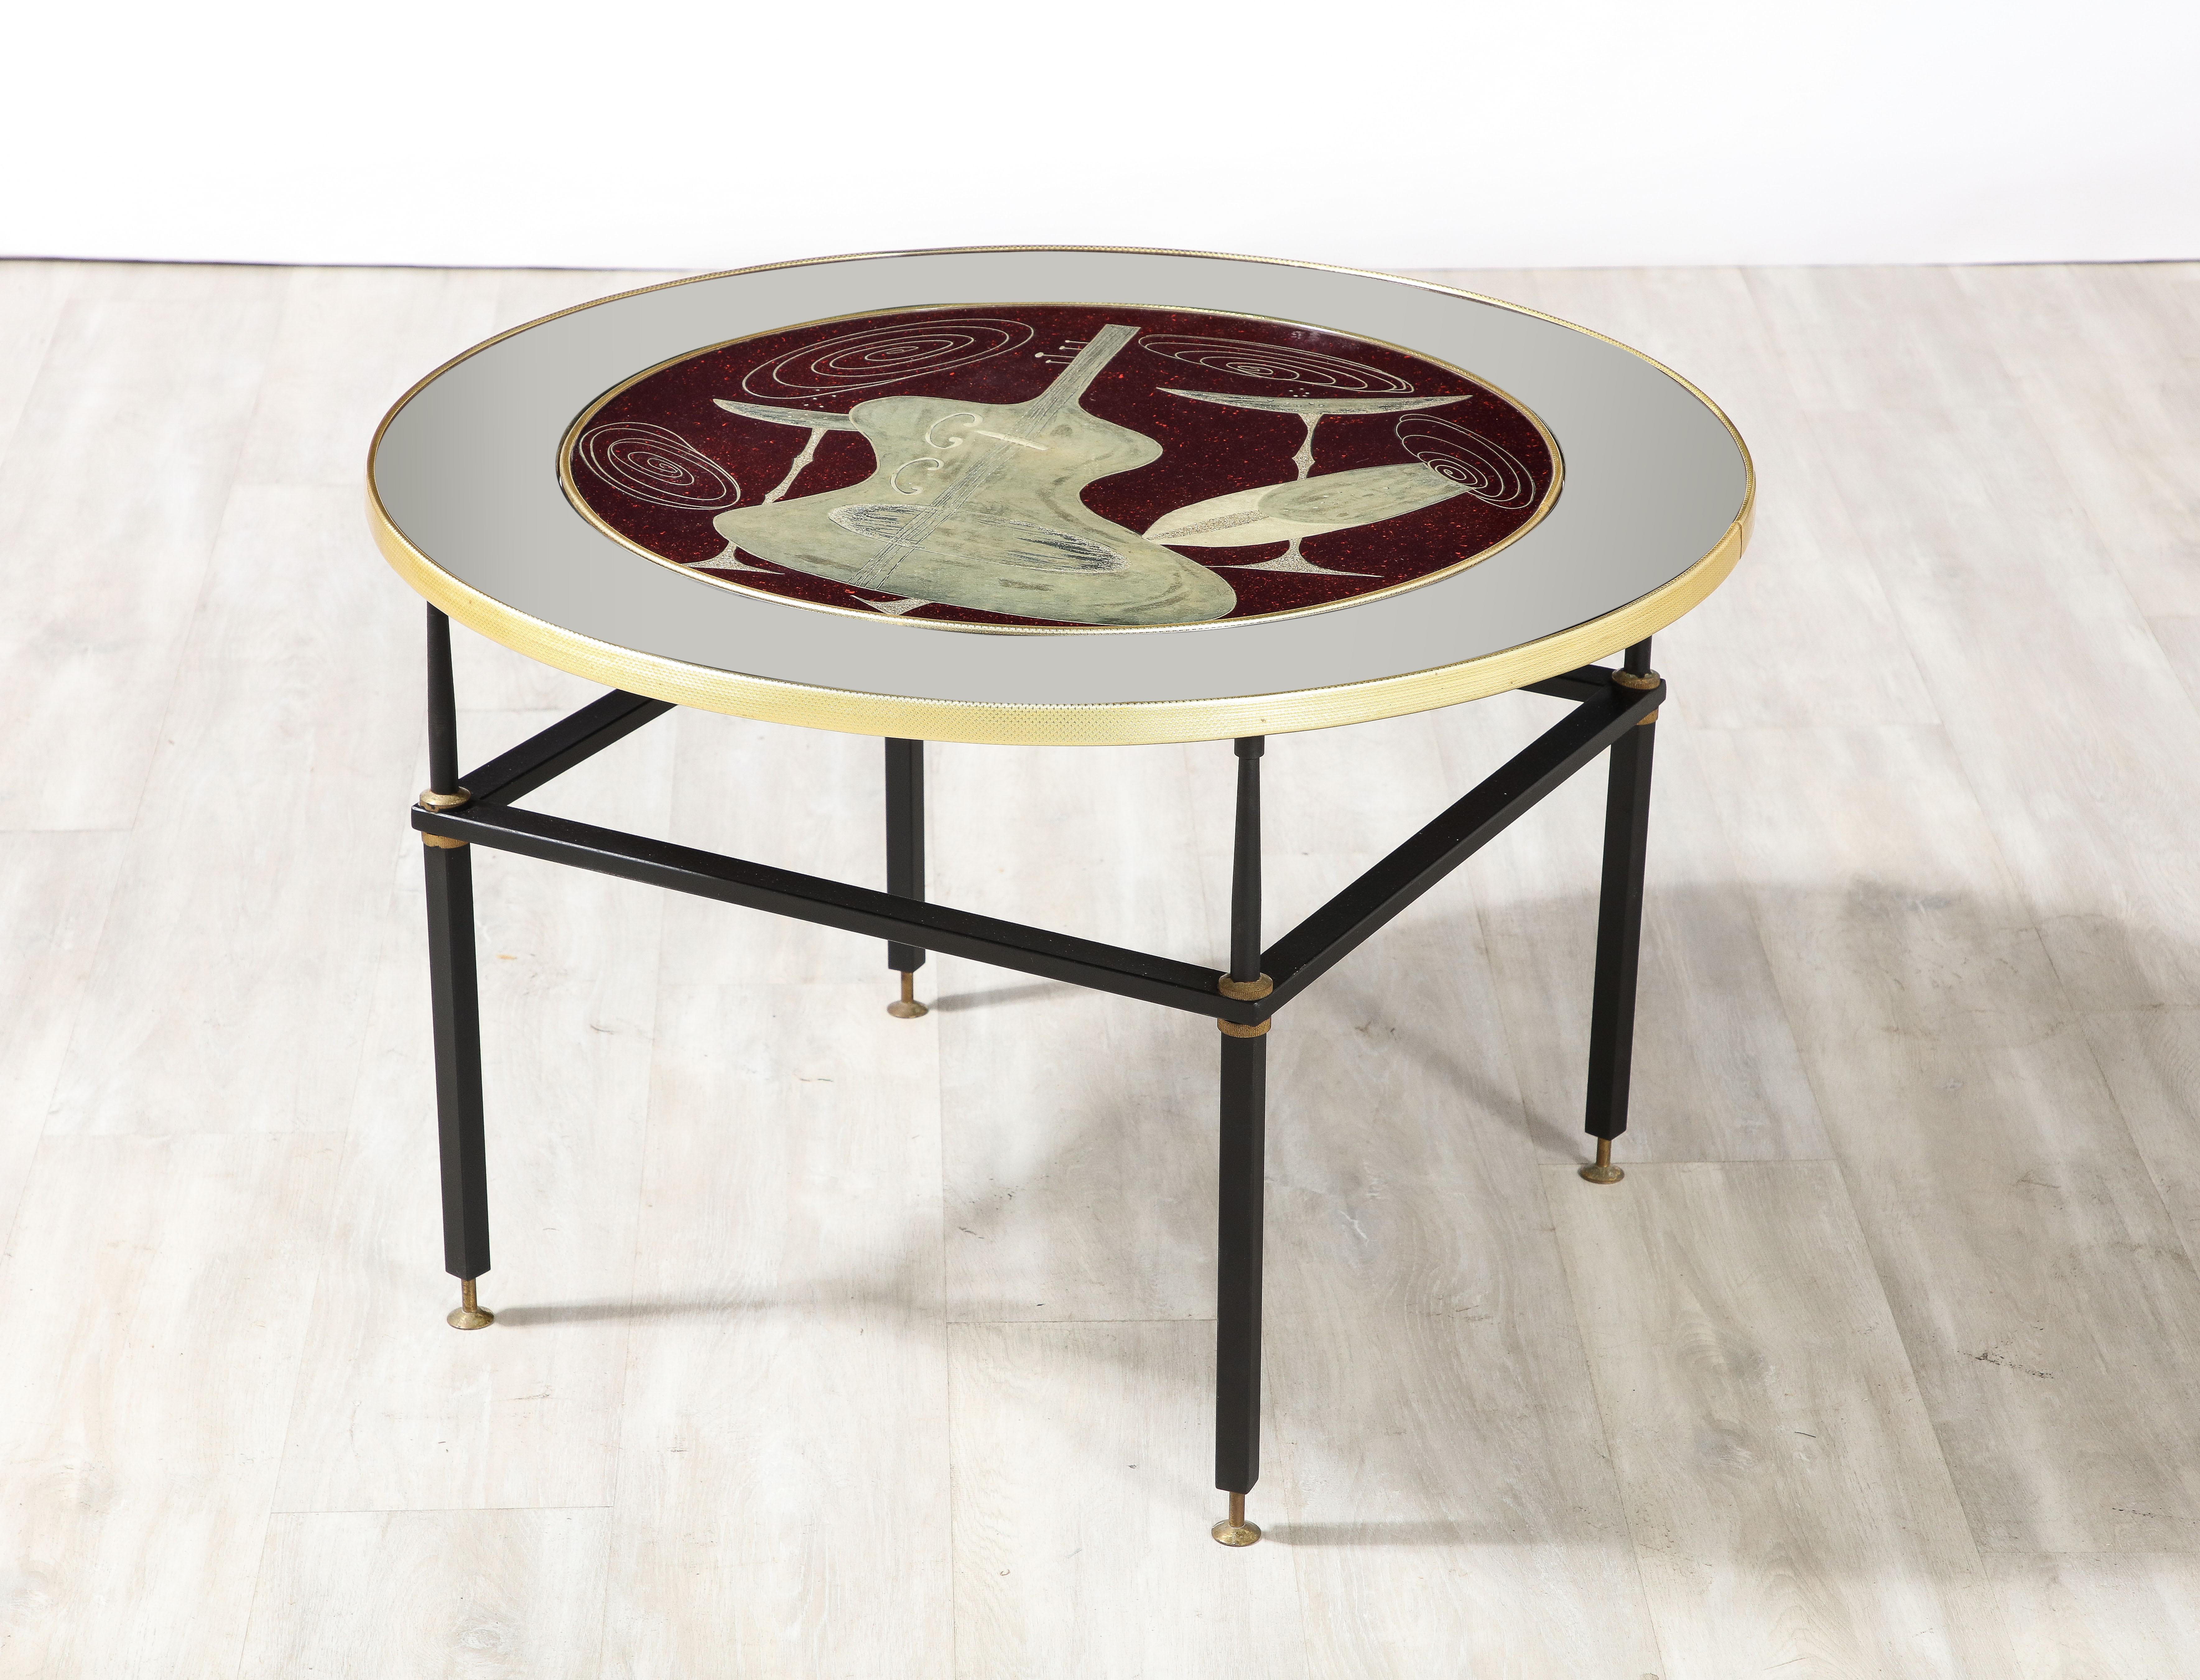 Cristal Arte Glass Table with Chess Board and Musical Motif, circa 1955 For Sale 2